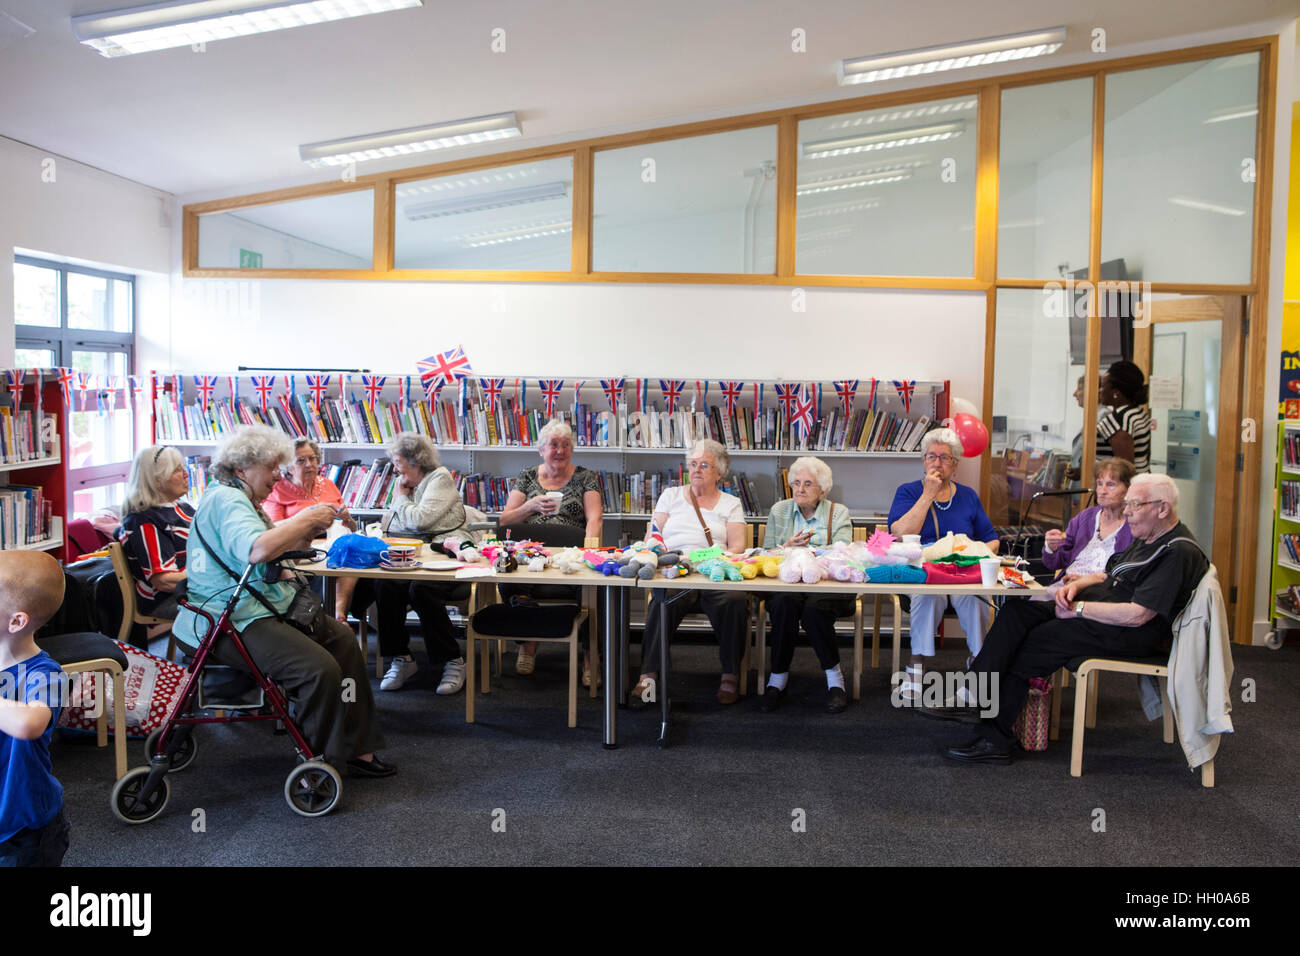 Elderly women selling knitwear during a party celebrating the Queen Elizabeth II's Birthday at Barking Community Centre Stock Photo